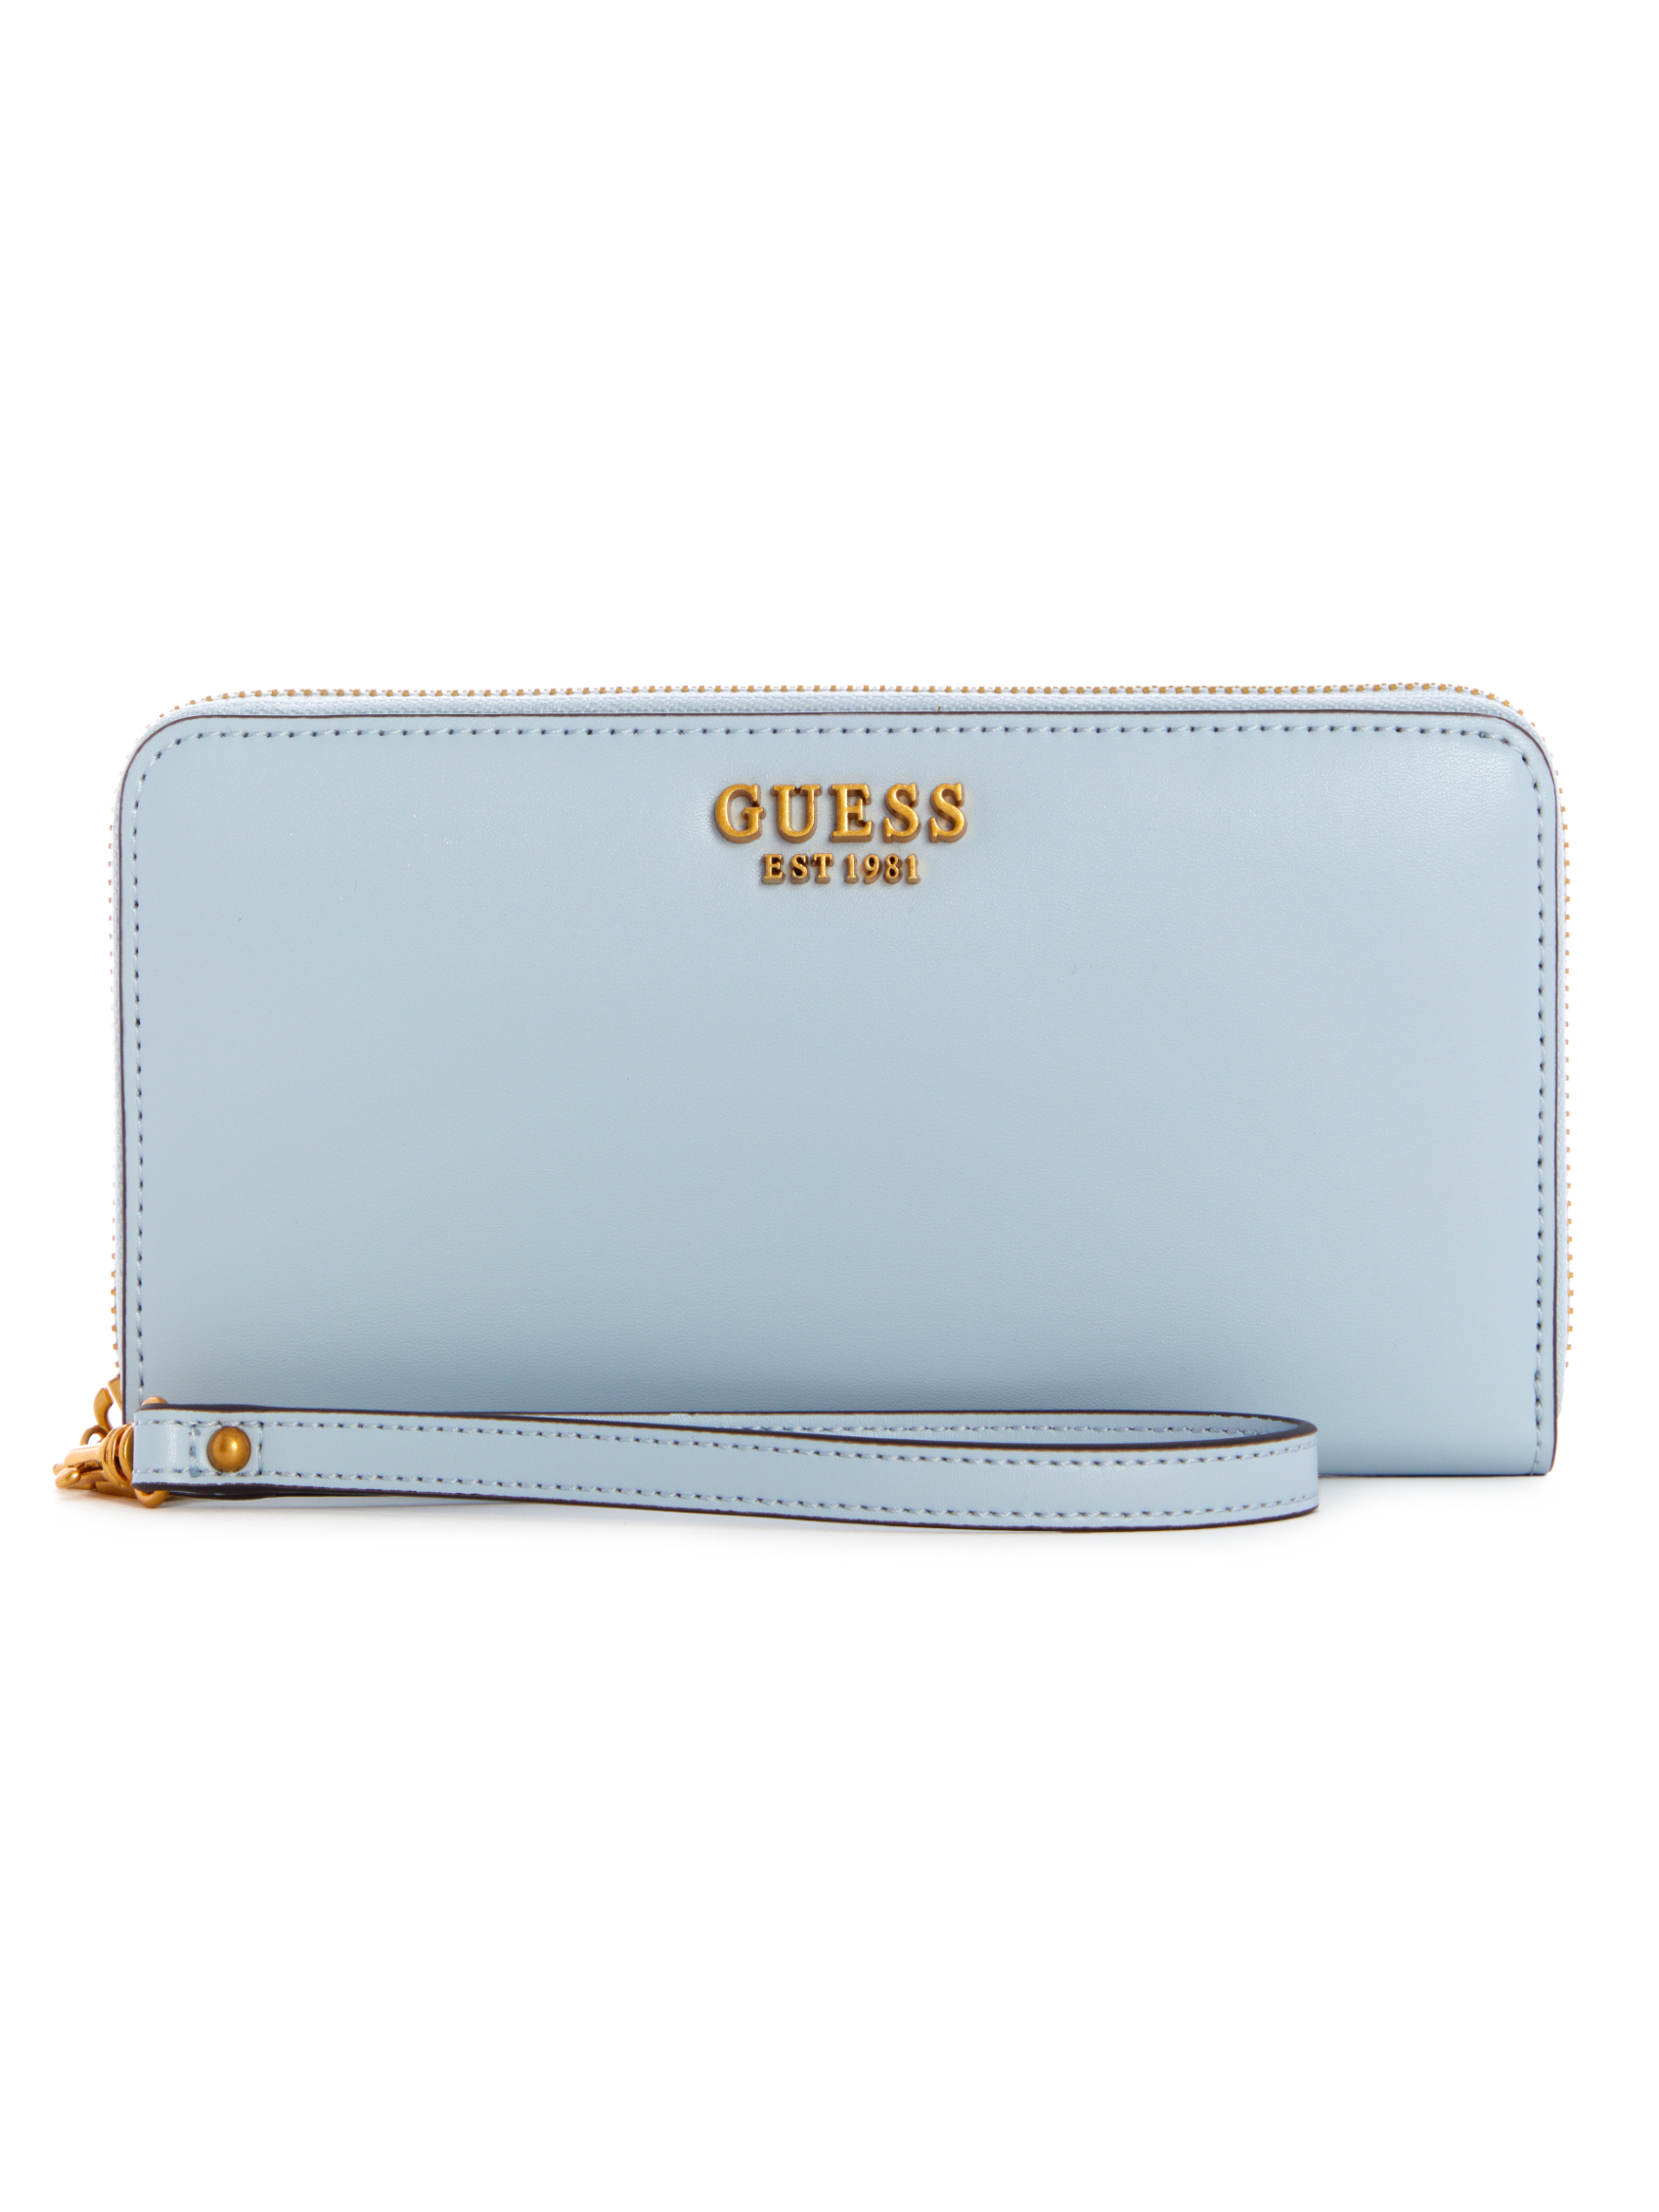 LAUREL SLING LARGE ZIP AROUND | Guess Philippines